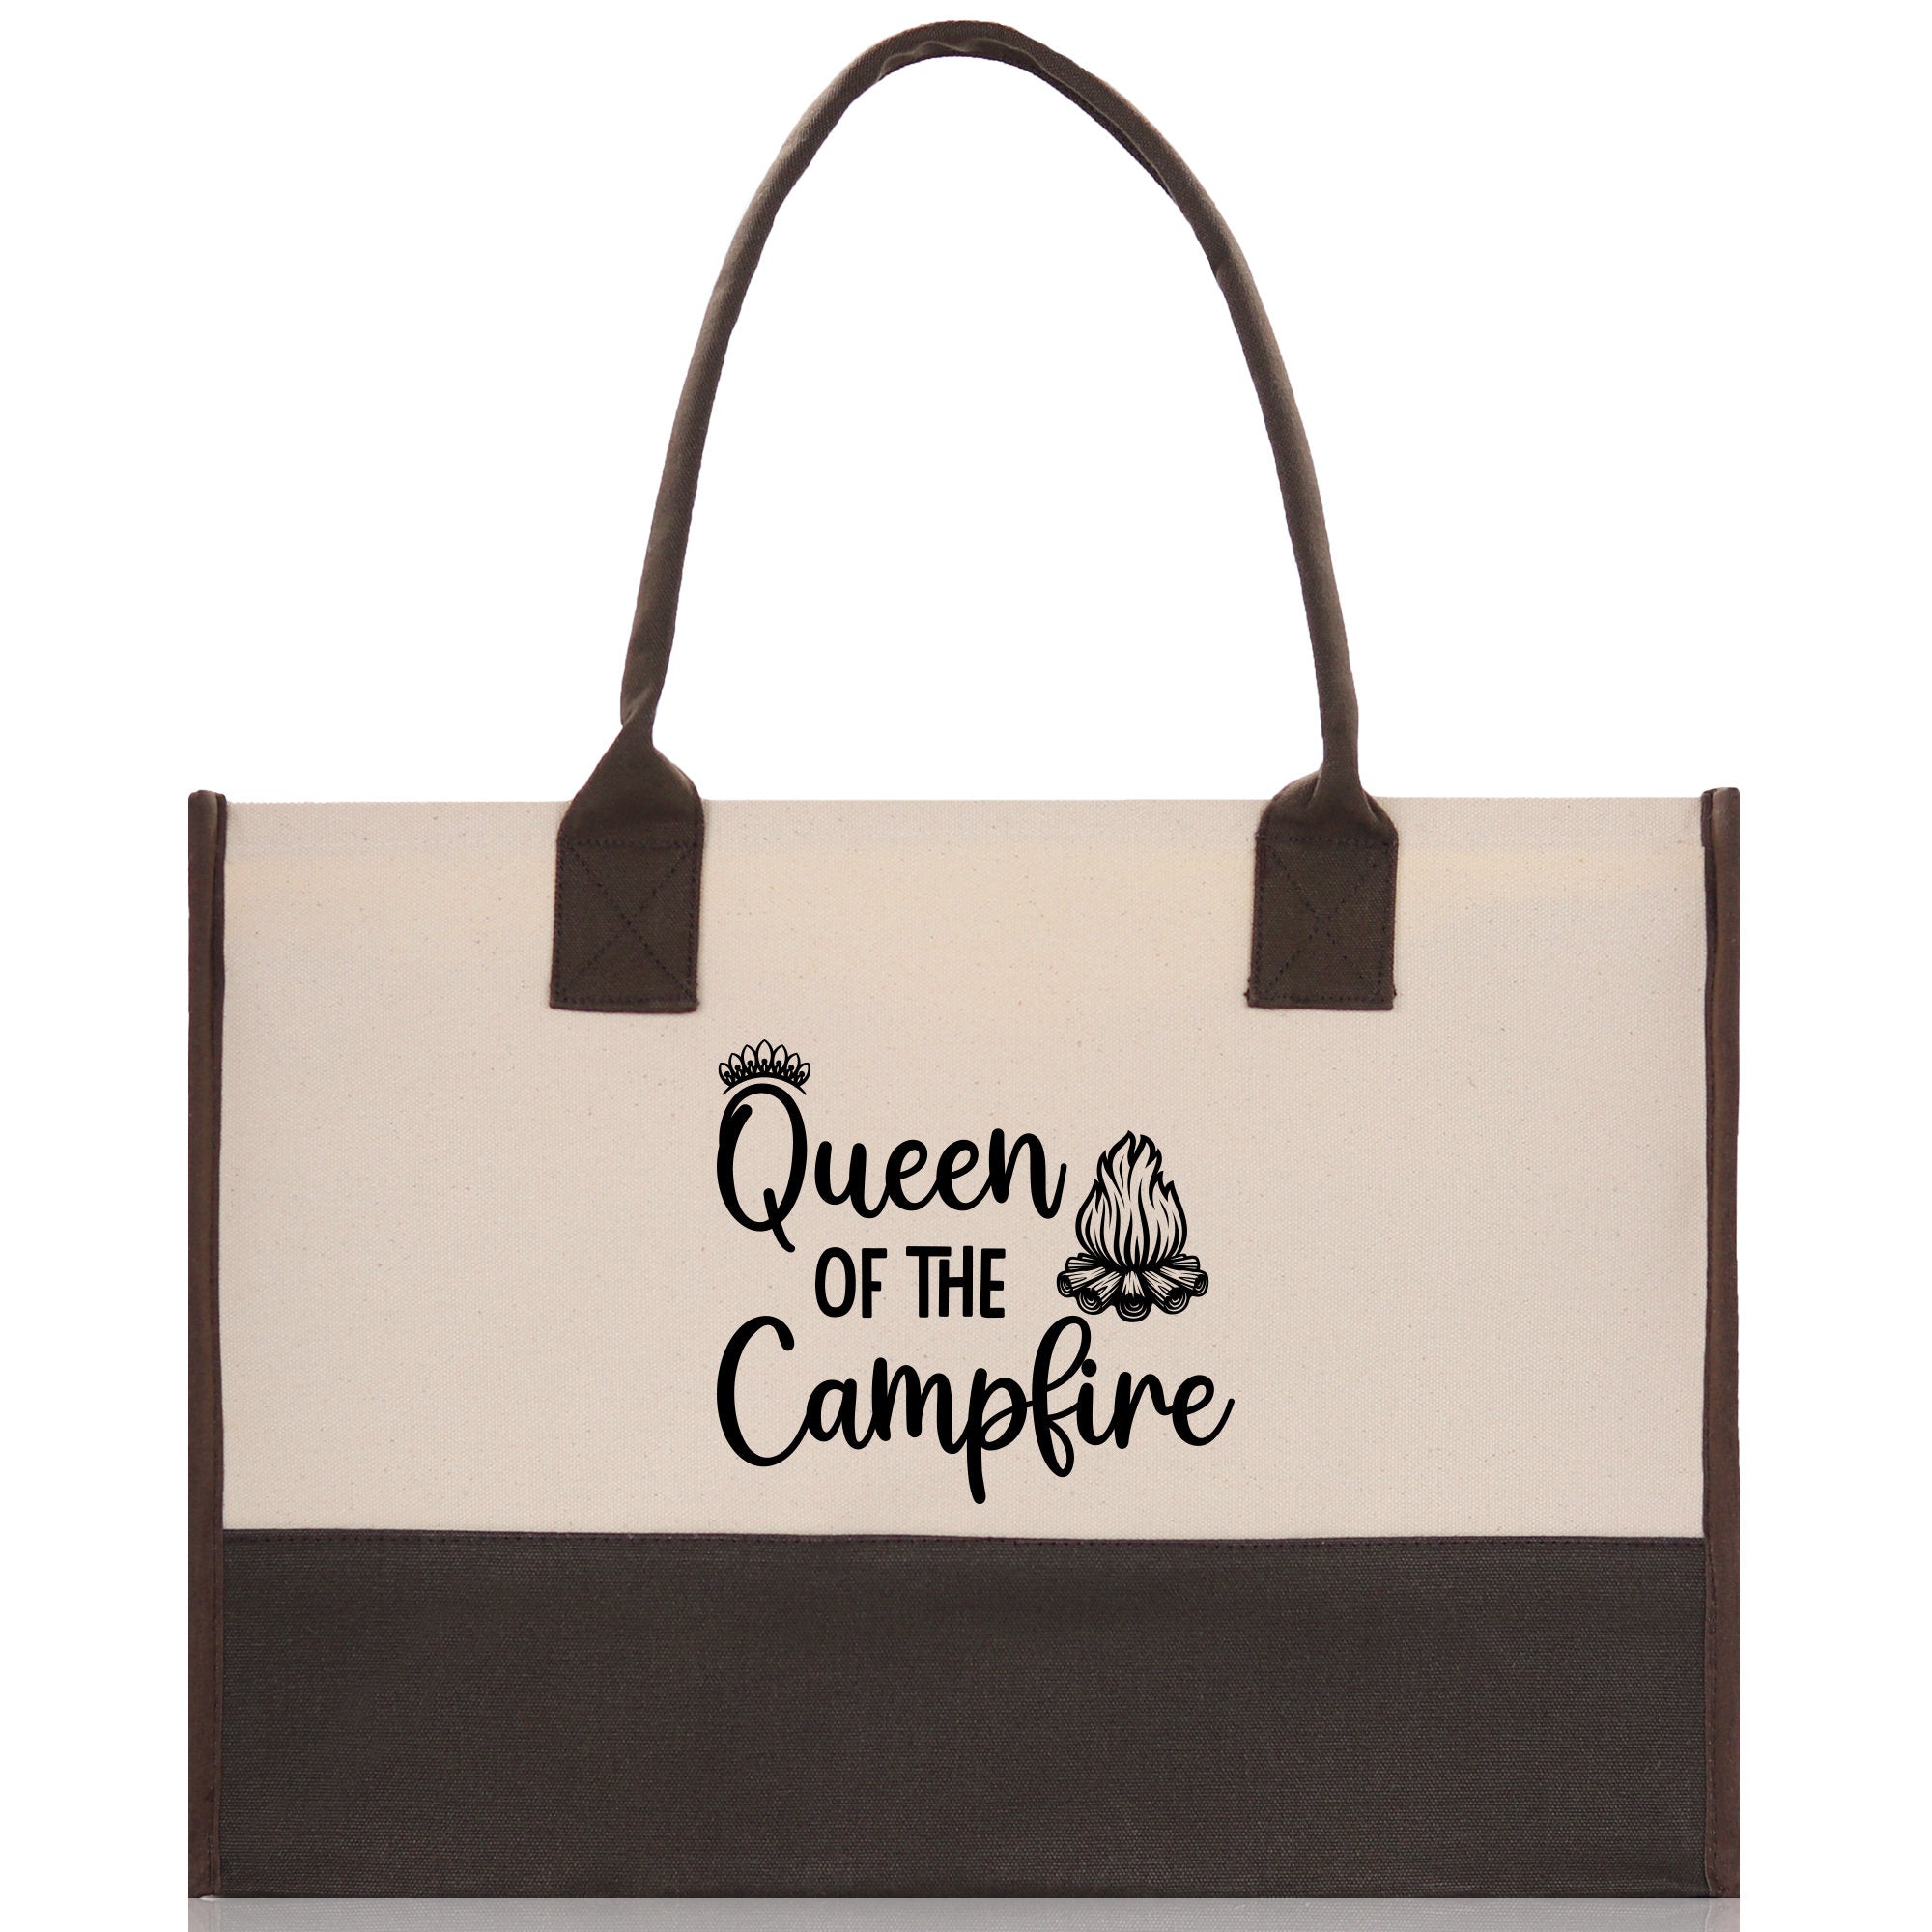 Queen of the Campfire  Cotton Canvas Chic Tote Bag Camping Tote Camping Lover Gift Tote Bag Outdoor Tote Weekender Tote Camper Tote